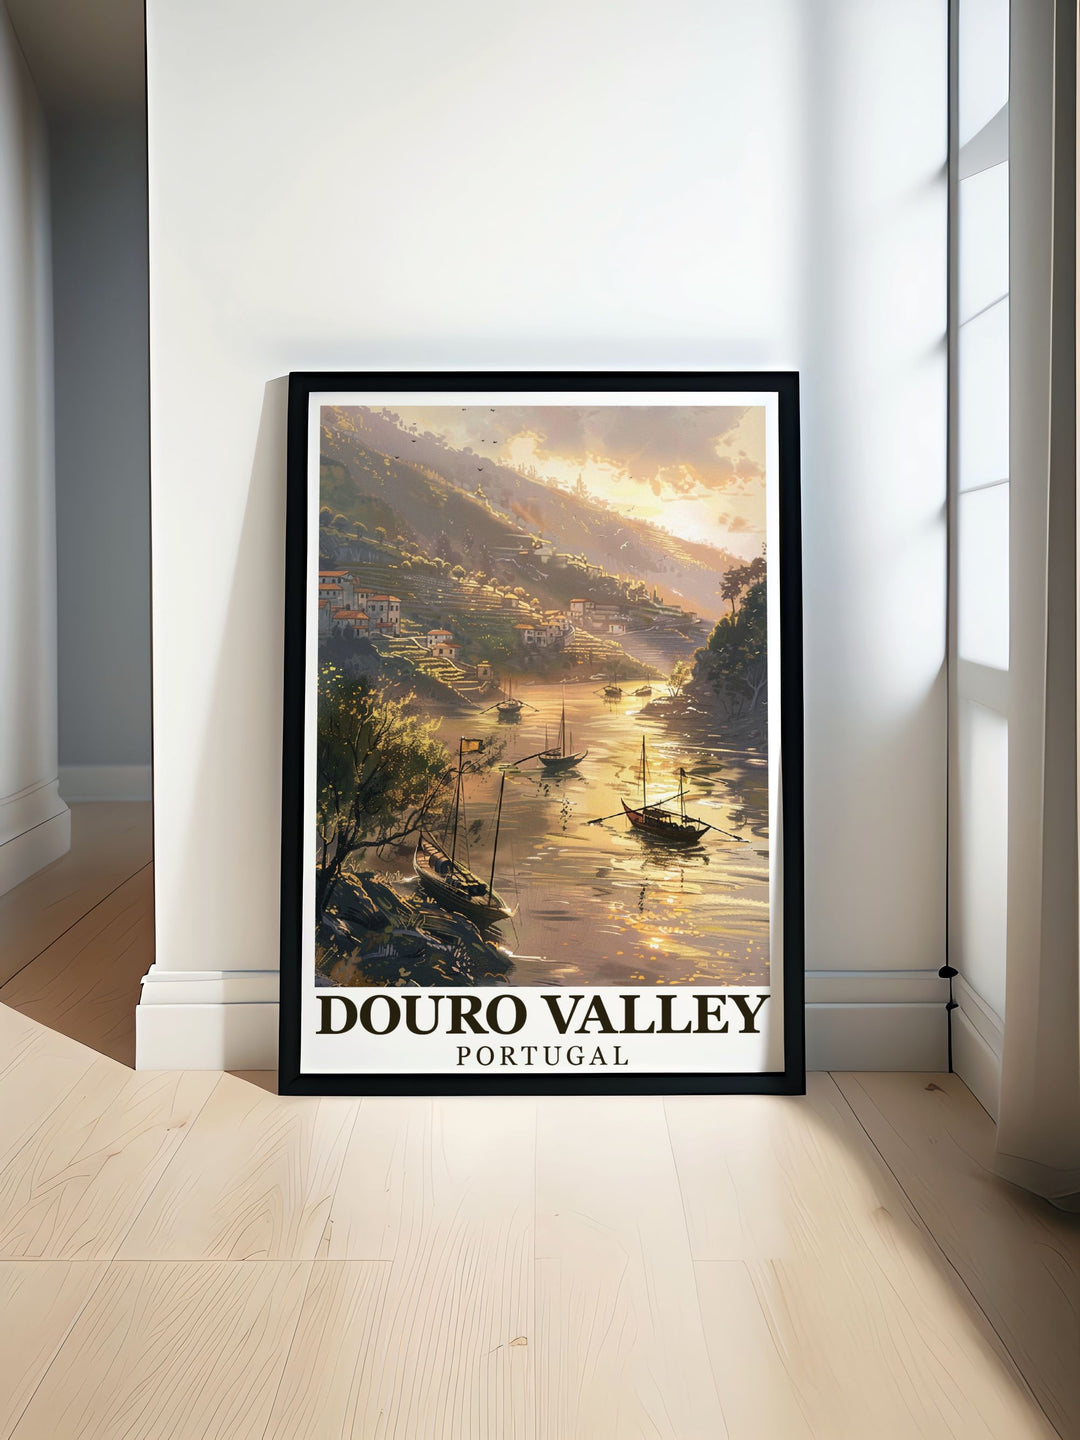 Canvas art print of the Douro River capturing the serene and majestic beauty of Portugals wine region, perfect for enhancing any room.